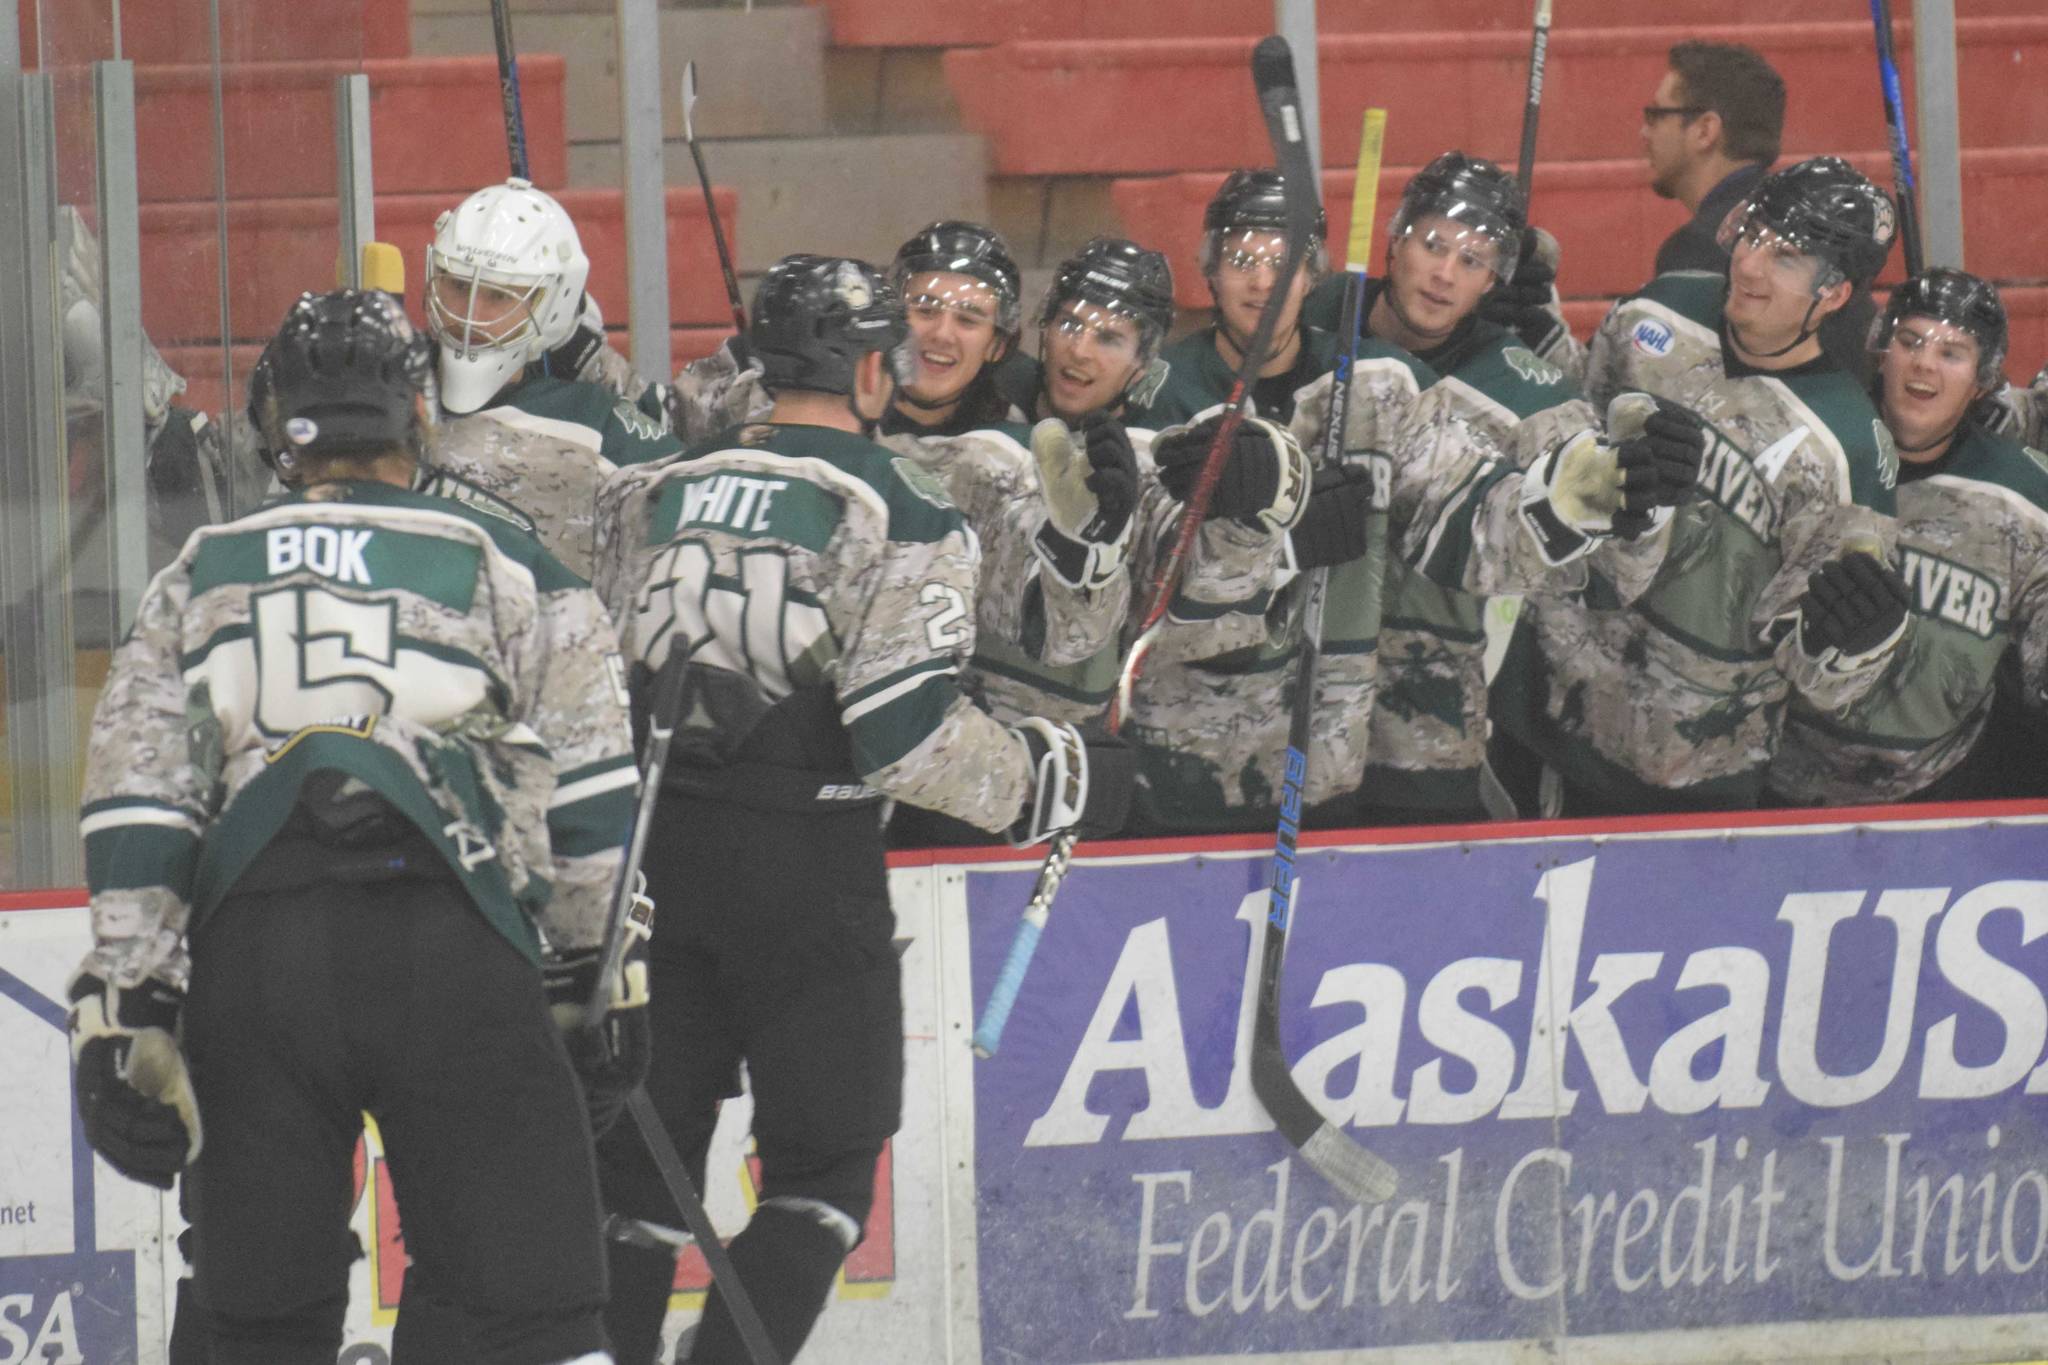 The Kenai River Brown Bears celebrate a goal against the Chippewa (Wisconsin) Steel on Jan. 11, 2019, at the Soldotna Regional Sports Complex. (Photo by Jeff Helminiak/Peninsula Clarion)